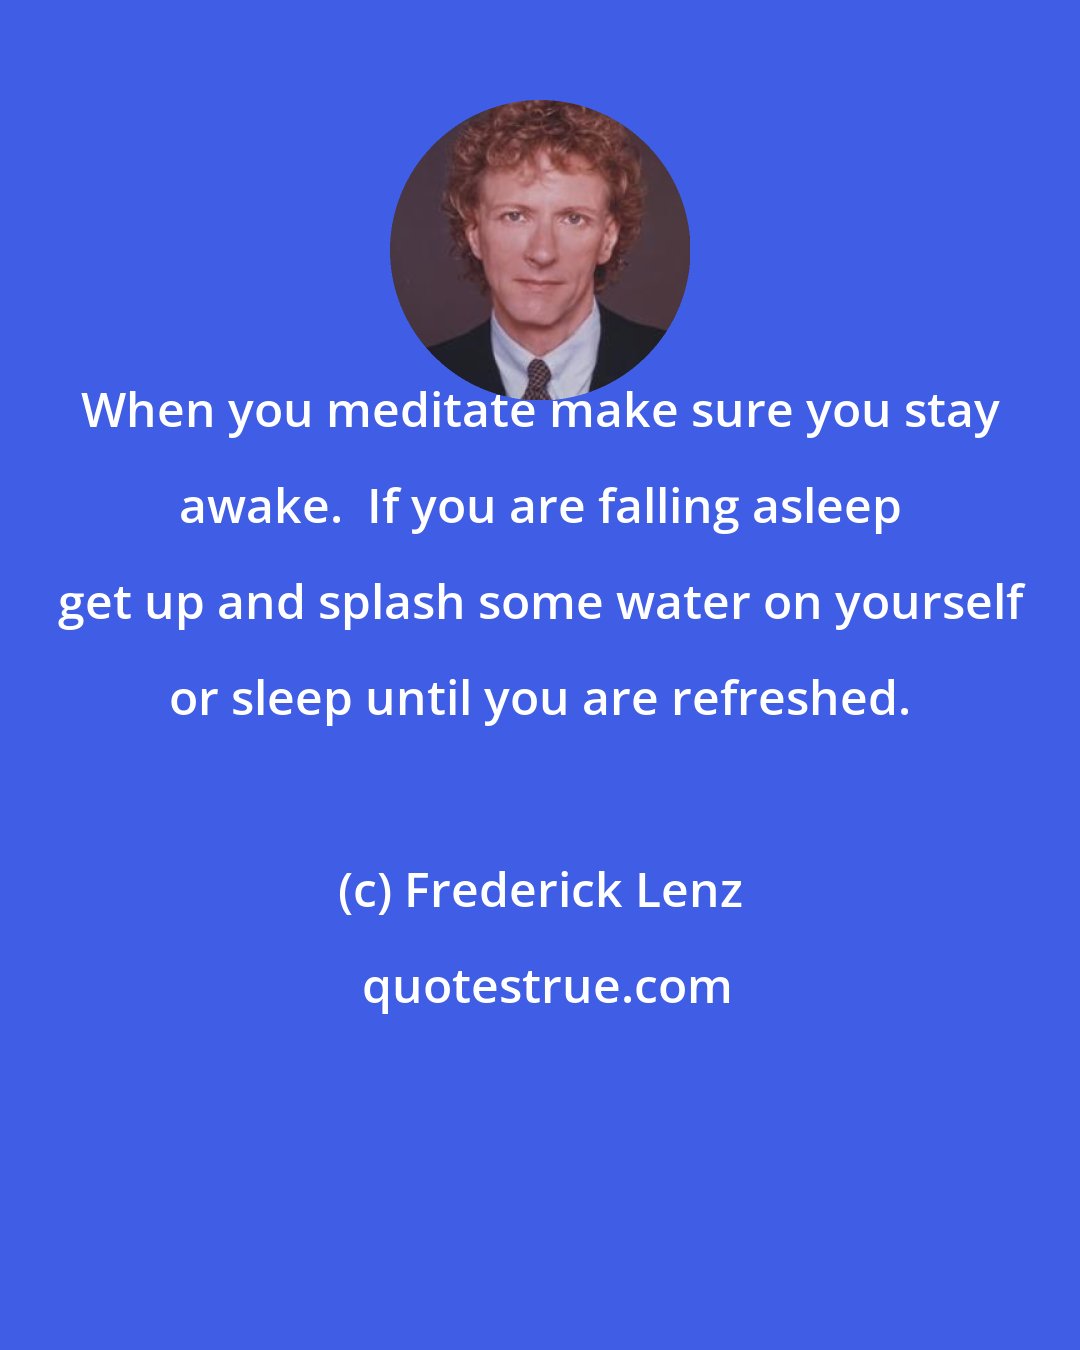 Frederick Lenz: When you meditate make sure you stay awake.  If you are falling asleep get up and splash some water on yourself or sleep until you are refreshed.